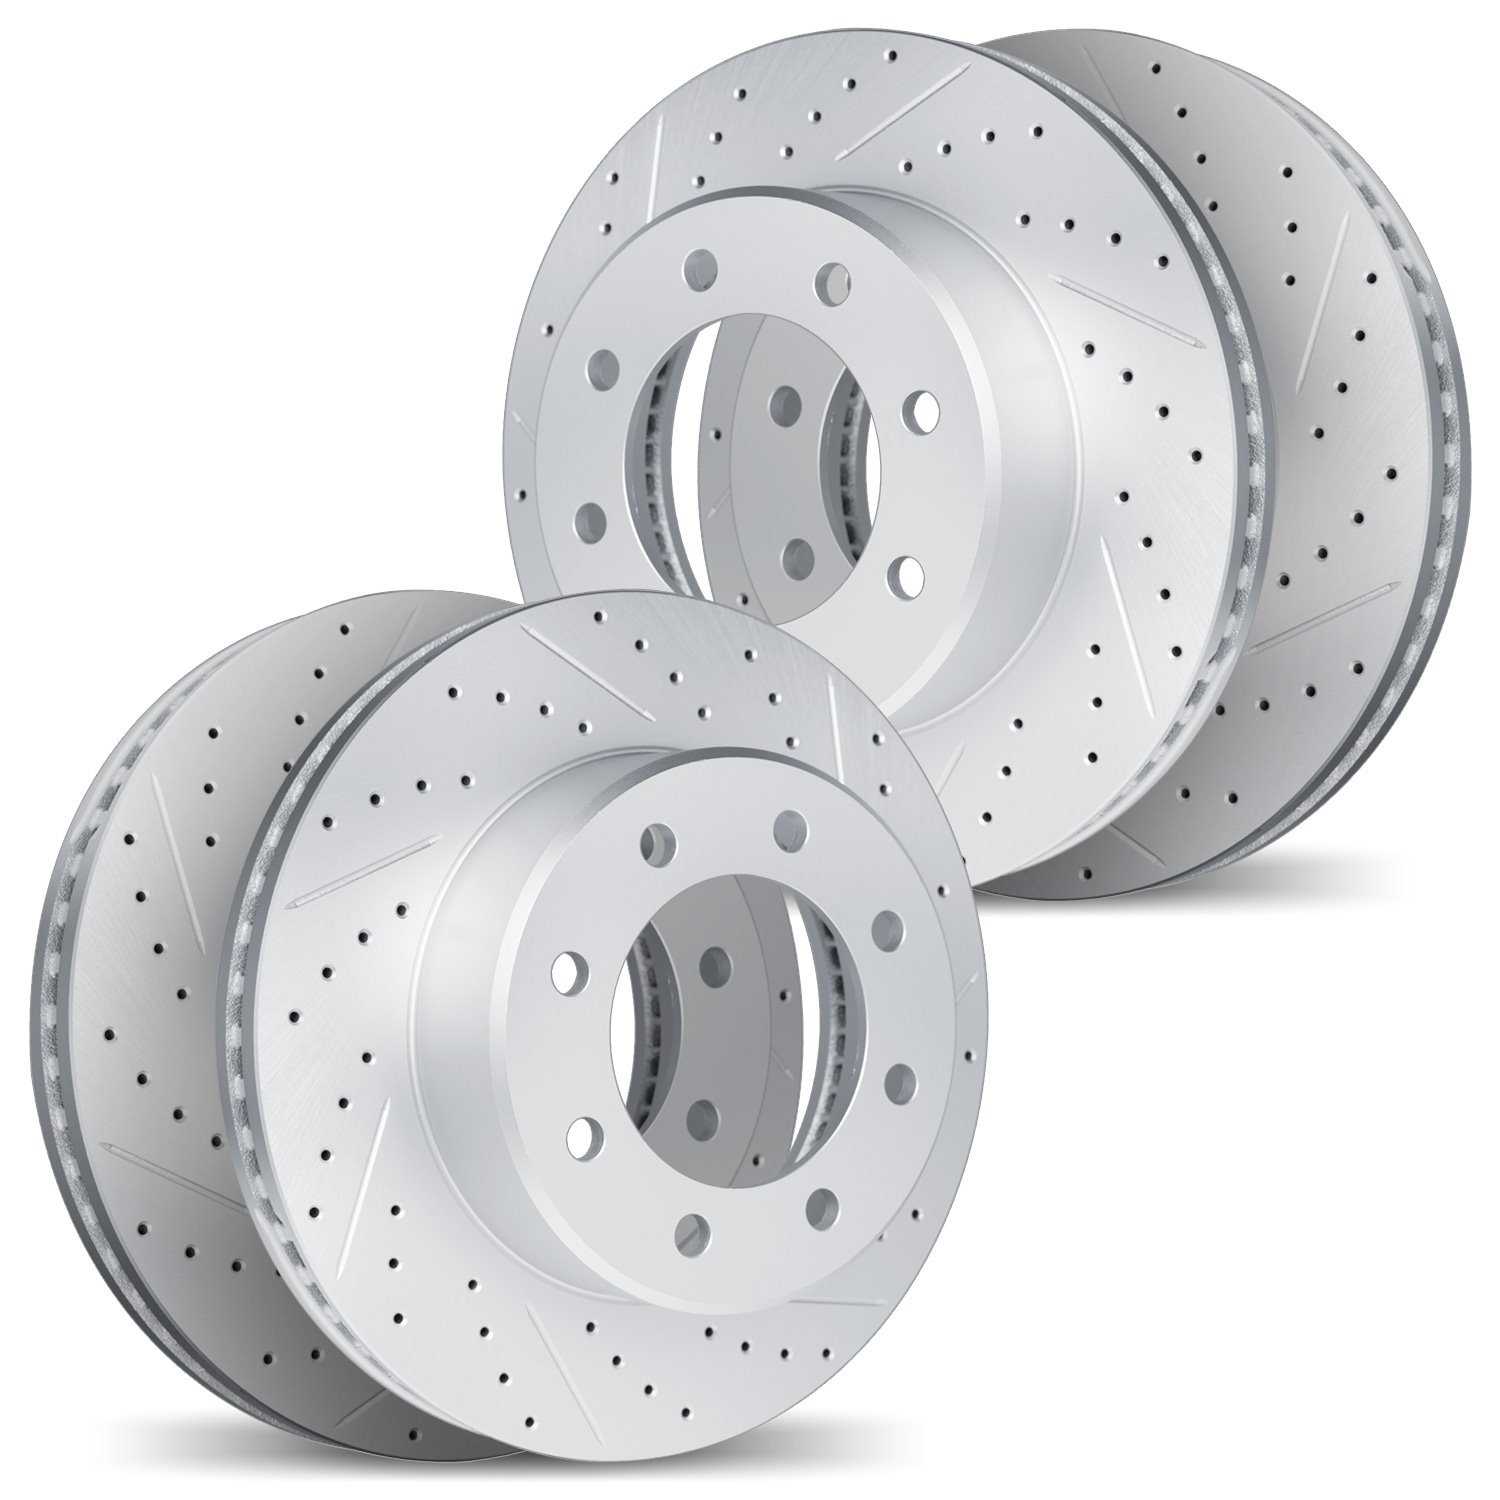 2004-54109 Geoperformance Drilled/Slotted Brake Rotors, Fits Select Ford/Lincoln/Mercury/Mazda, Position: Front and Rear